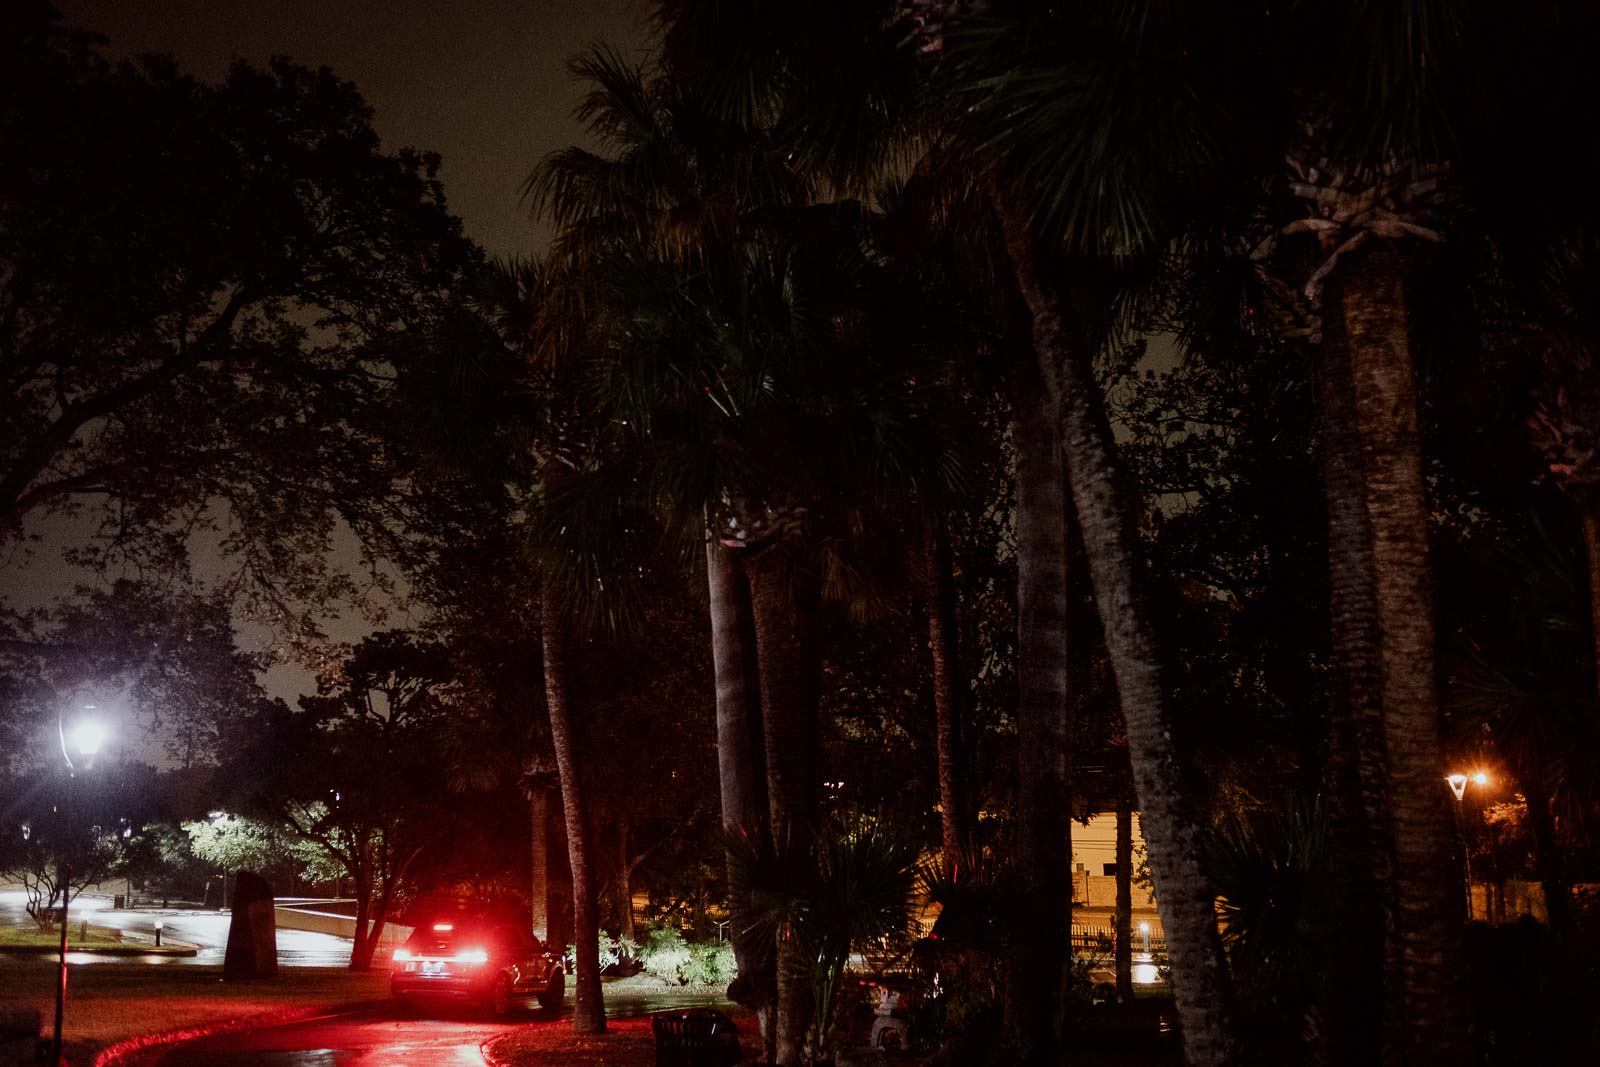 A SUV drives of with the couple inside at the McNay as palms trees are silhouetted against the night sky